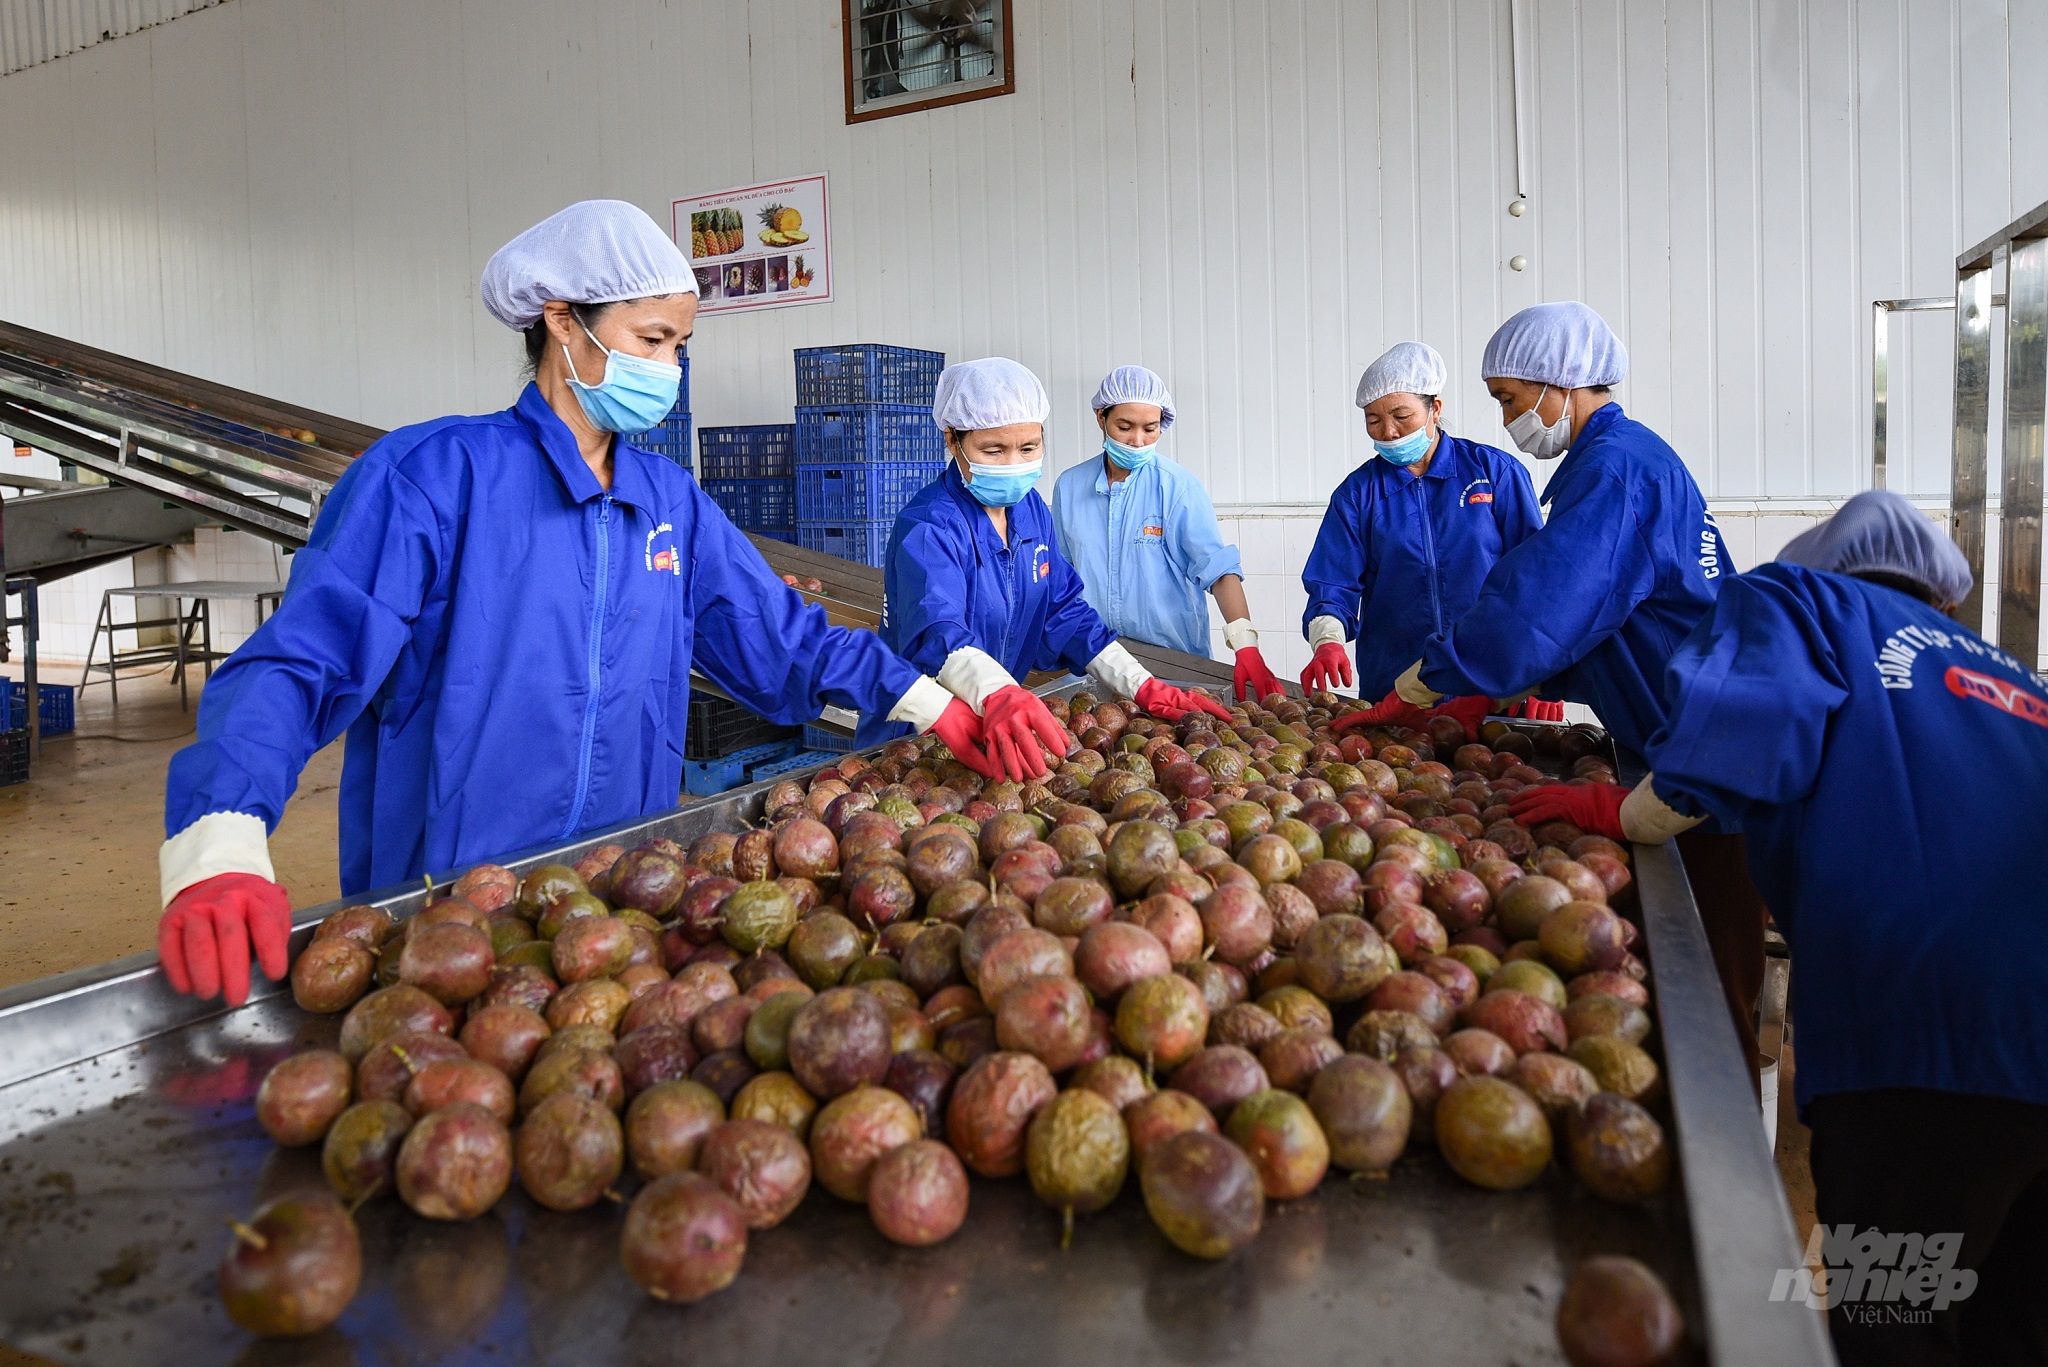 After 2 months, exports of agricultural products reached more than USD 8 billion. Photo: Tung Dinh.